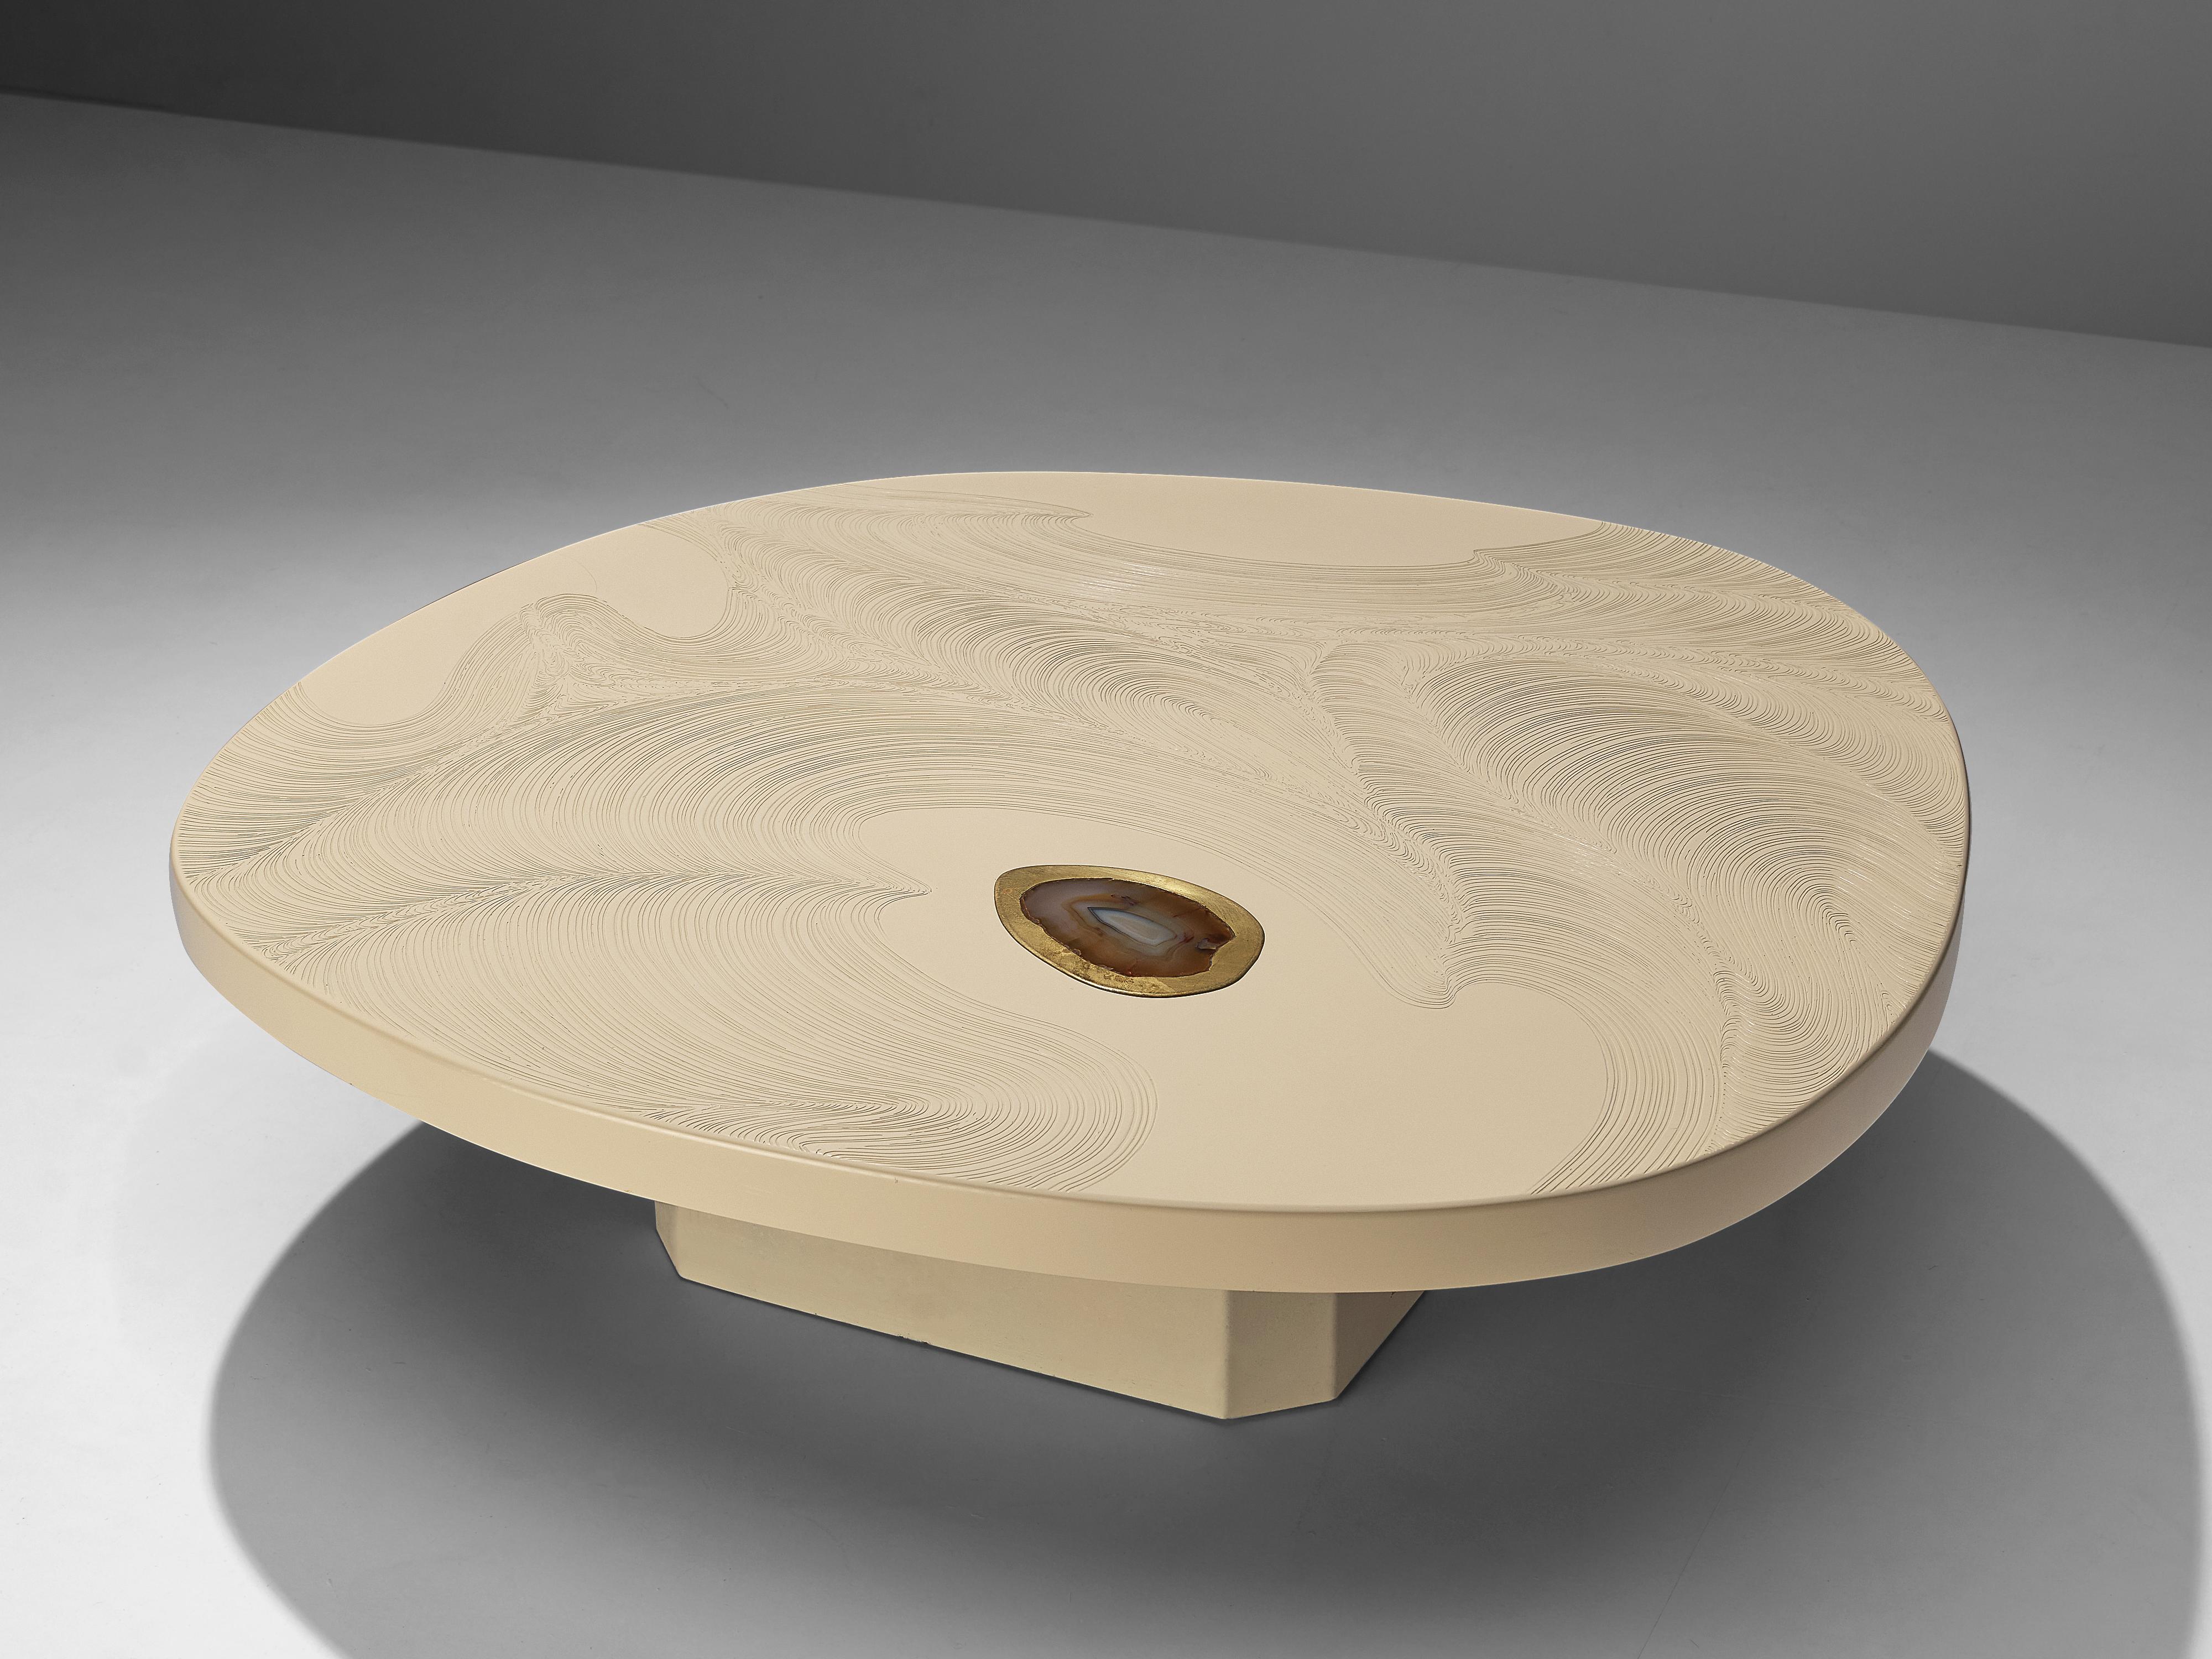 Late 20th Century Jean Claude Dresse Freeform Coffee Table in White Resin, Brass and Agate